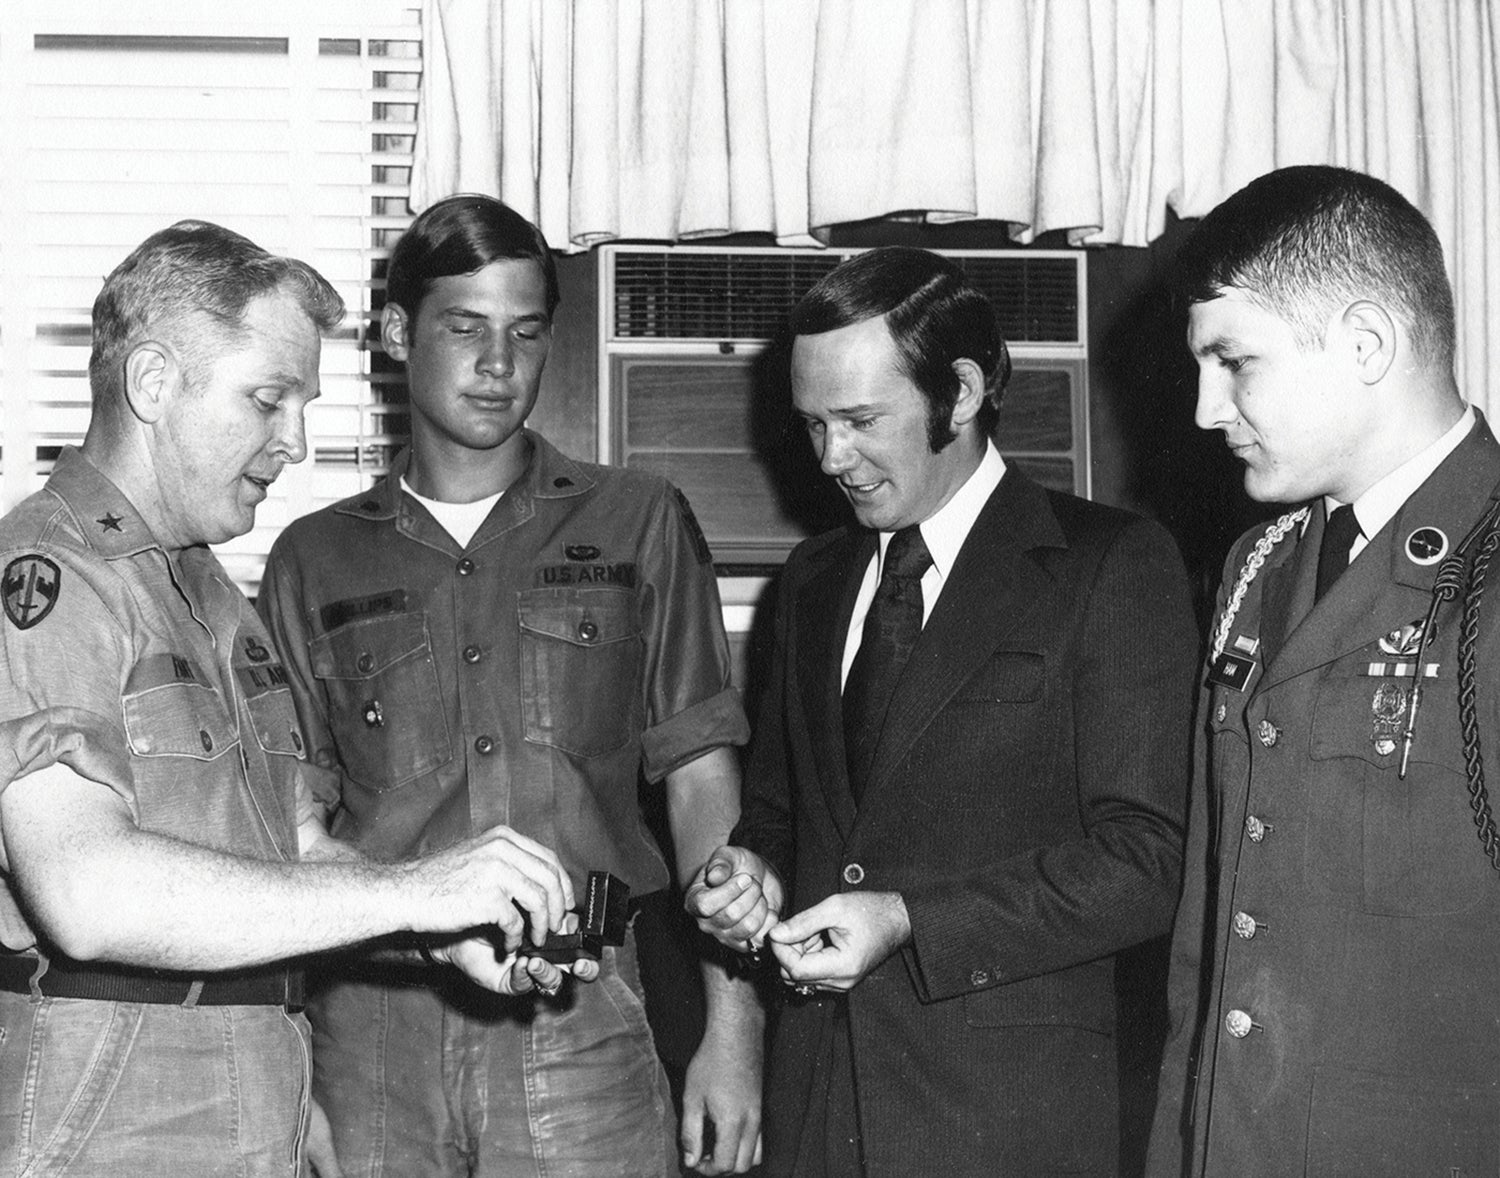 Spc. 4 Carter Ham, right, is recognized as the 82nd Airborne Division’s Outstanding Trooper of the Month in July 1974. (Credit: Courtesy of retired Gen. Carter Ham)